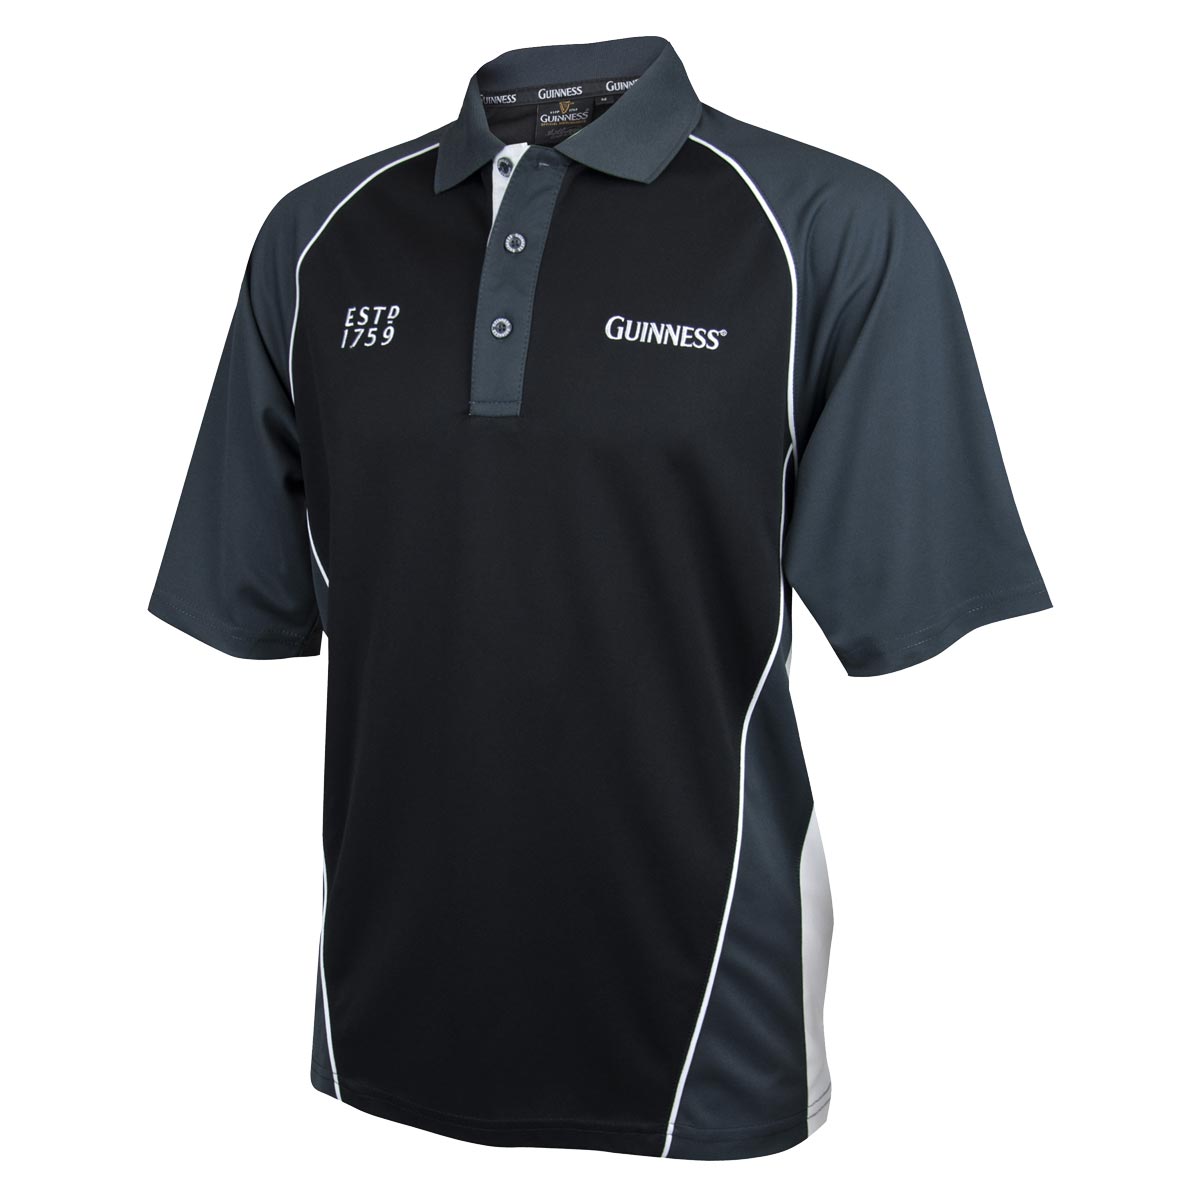 A black and grey moisture wicking fabric Guinness Performance Golf Shirt with an embroidered Guinness logo.